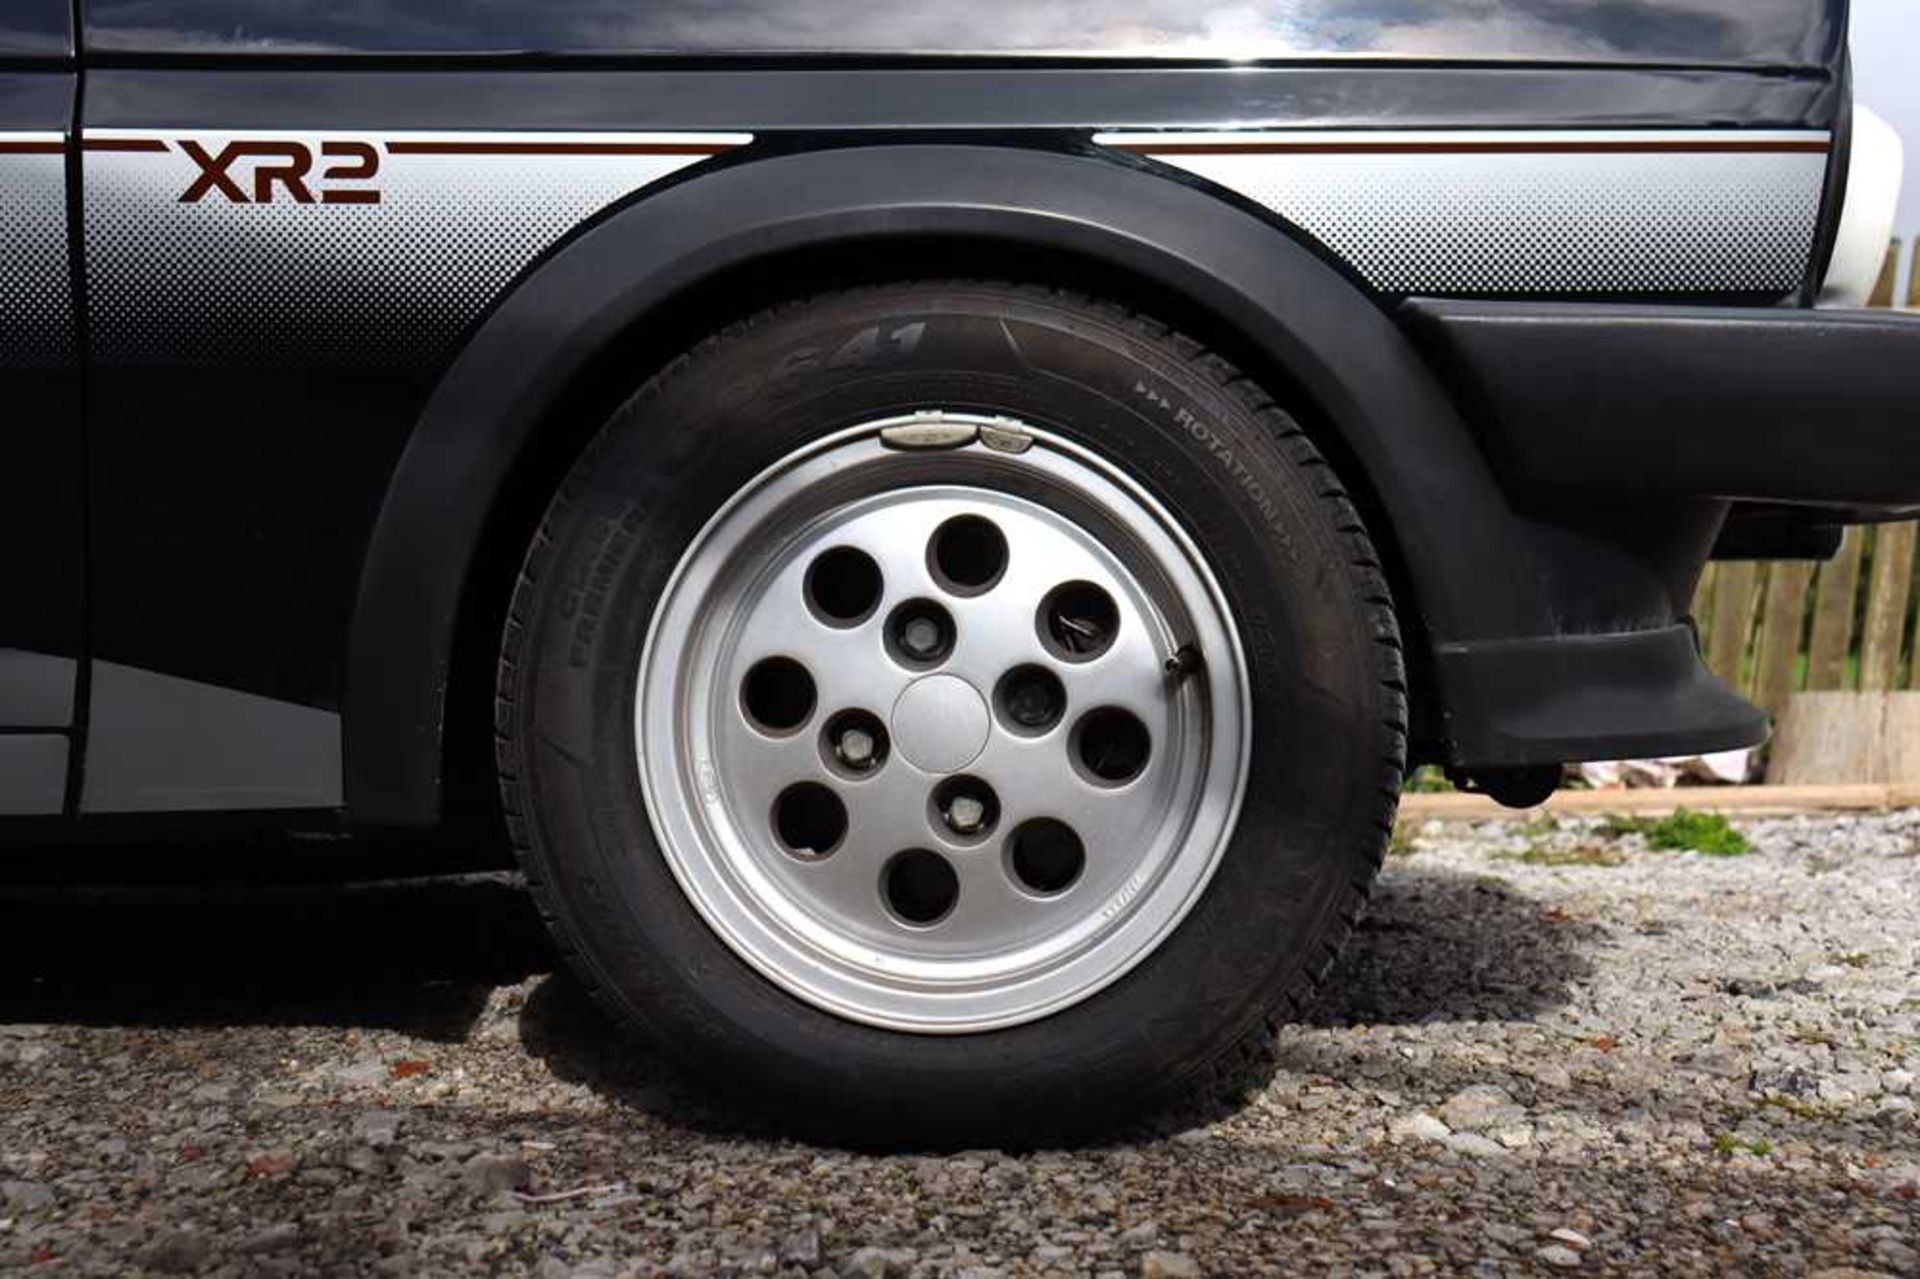 1983 Ford Fiesta XR2 - Image 38 of 56